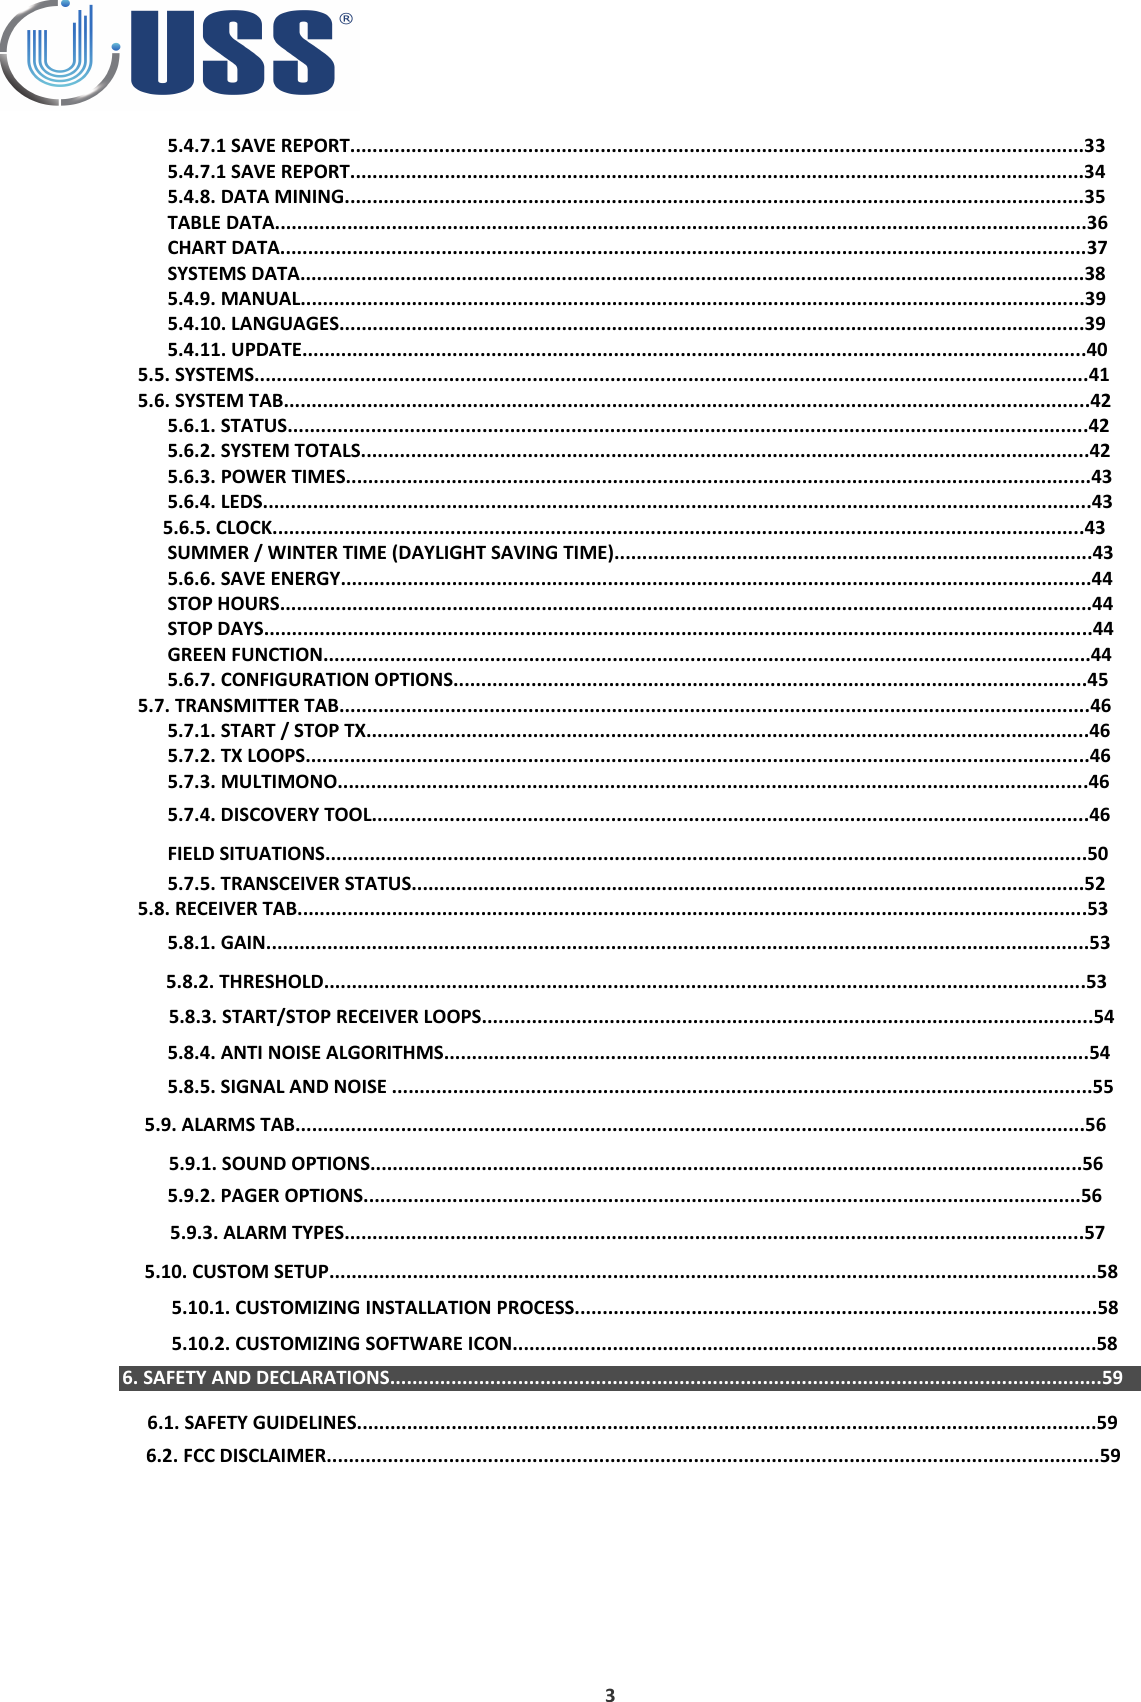 5.4.7.1 SAVE REPORT....................................................................................................................................335.4.7.1 SAVE REPORT....................................................................................................................................345.4.8. DATA MINING.....................................................................................................................................35TABLE DATA..................................................................................................................................................36CHART DATA.................................................................................................................................................37SYSTEMS DATA.............................................................................................................................................385.4.9. MANUAL.............................................................................................................................................395.4.10. LANGUAGES......................................................................................................................................395.4.11. UPDATE.............................................................................................................................................405.5. SYSTEMS......................................................................................................................................................415.6. SYSTEM TAB.................................................................................................................................................425.6.1. STATUS................................................................................................................................................425.6.2. SYSTEM TOTALS...................................................................................................................................425.6.3. POWER TIMES......................................................................................................................................435.6.4. LEDS.....................................................................................................................................................43 5.6.5. CLOCK..................................................................................................................................................43SUMMER / WINTER TIME (DAYLIGHT SAVING TIME)......................................................................................435.6.6. SAVE ENERGY.......................................................................................................................................44STOP HOURS..................................................................................................................................................44STOP DAYS.....................................................................................................................................................44GREEN FUNCTION..........................................................................................................................................445.6.7. CONFIGURATION OPTIONS..................................................................................................................455.7. TRANSMITTER TAB.......................................................................................................................................465.7.1. START / STOP TX..................................................................................................................................465.7.2. TX LOOPS.............................................................................................................................................465.7.3. MULTIMONO.......................................................................................................................................465.7.4. DISCOVERY TOOL.................................................................................................................................46FIELD SITUATIONS.........................................................................................................................................505.7.5. TRANSCEIVER STATUS.........................................................................................................................525.8. RECEIVER TAB..............................................................................................................................................535.8.1. GAIN....................................................................................................................................................535.8.2. THRESHOLD.........................................................................................................................................535.8.3. START/STOP RECEIVER LOOPS..............................................................................................................545.8.4. ANTI NOISE ALGORITHMS....................................................................................................................545.8.5. SIGNAL AND NOISE ..............................................................................................................................555.9. ALARMS TAB..............................................................................................................................................565.9.1. SOUND OPTIONS................................................................................................................................565.9.2. PAGER OPTIONS.................................................................................................................................565.9.3. ALARM TYPES.....................................................................................................................................575.10. CUSTOM SETUP..........................................................................................................................................585.10.1. CUSTOMIZING INSTALLATION PROCESS..............................................................................................585.10.2. CUSTOMIZING SOFTWARE ICON.........................................................................................................586. SAFETY AND DECLARATIONS................................................................................................................................596.1. SAFETY GUIDELINES.....................................................................................................................................596.2. FCC DISCLAIMER...........................................................................................................................................593